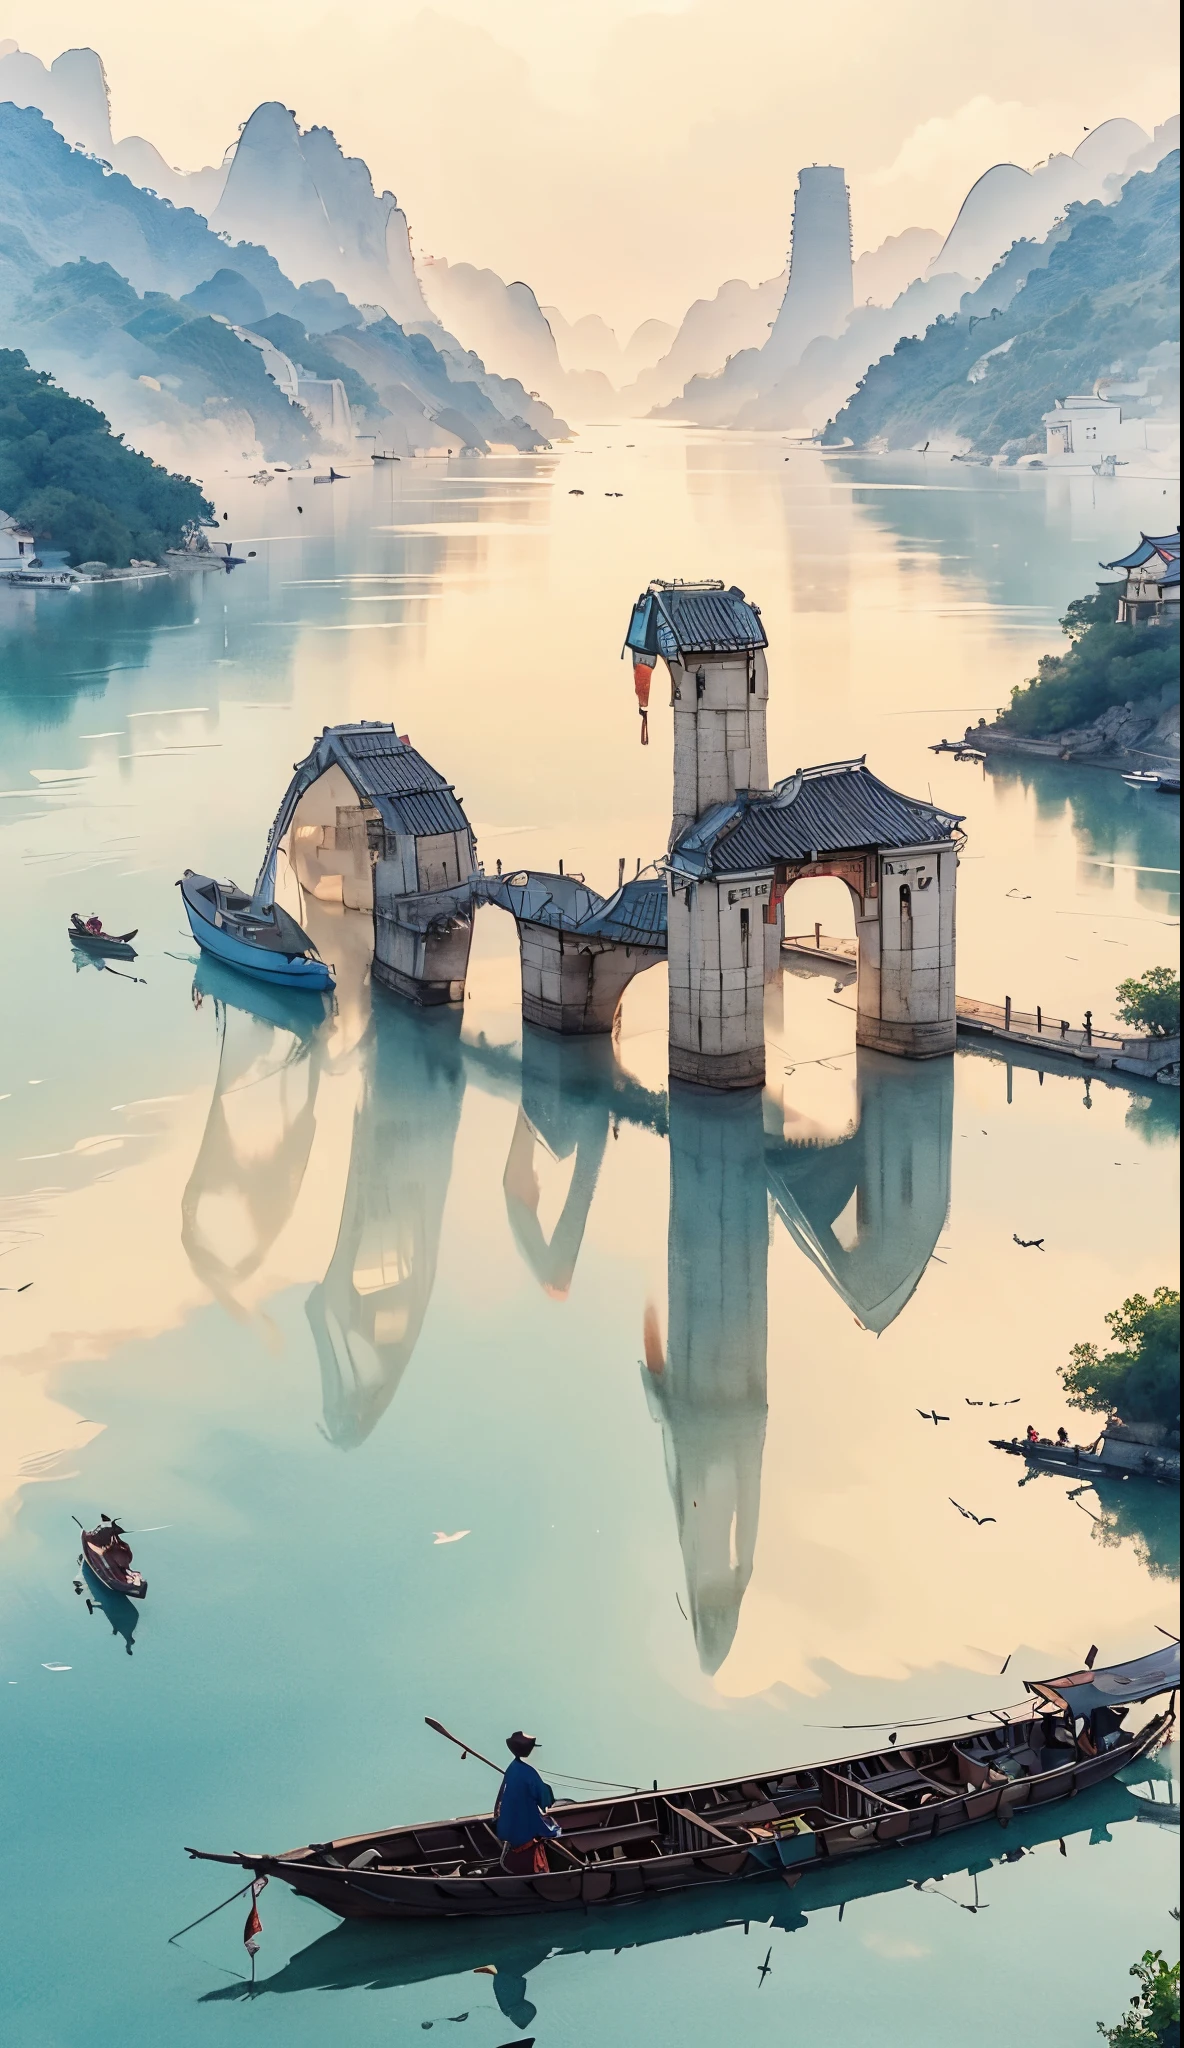 ( (8k:1.27), quality, tmasterpiece, Ultra-high resolution:1.2) ，Ink painting of ancient buildings on the island，the tower、that tree, Yang Jie&#39;s meticulous paintings, pixiv, Modern European ink painting, chinese watercolor style, highly detailed water colour 8 k, High detail watercolor 8k, Detailed 4K drawing of a boat carrying people on the lake,Hot topics on artstation,chinese watercolor style, chinese painting style, Dream Chinatown, chinese paintings, detailed painting 4 k, A beautiful artistic illustration, highly detailed water colour 8 k， (Beautiful wonderland:1.1)